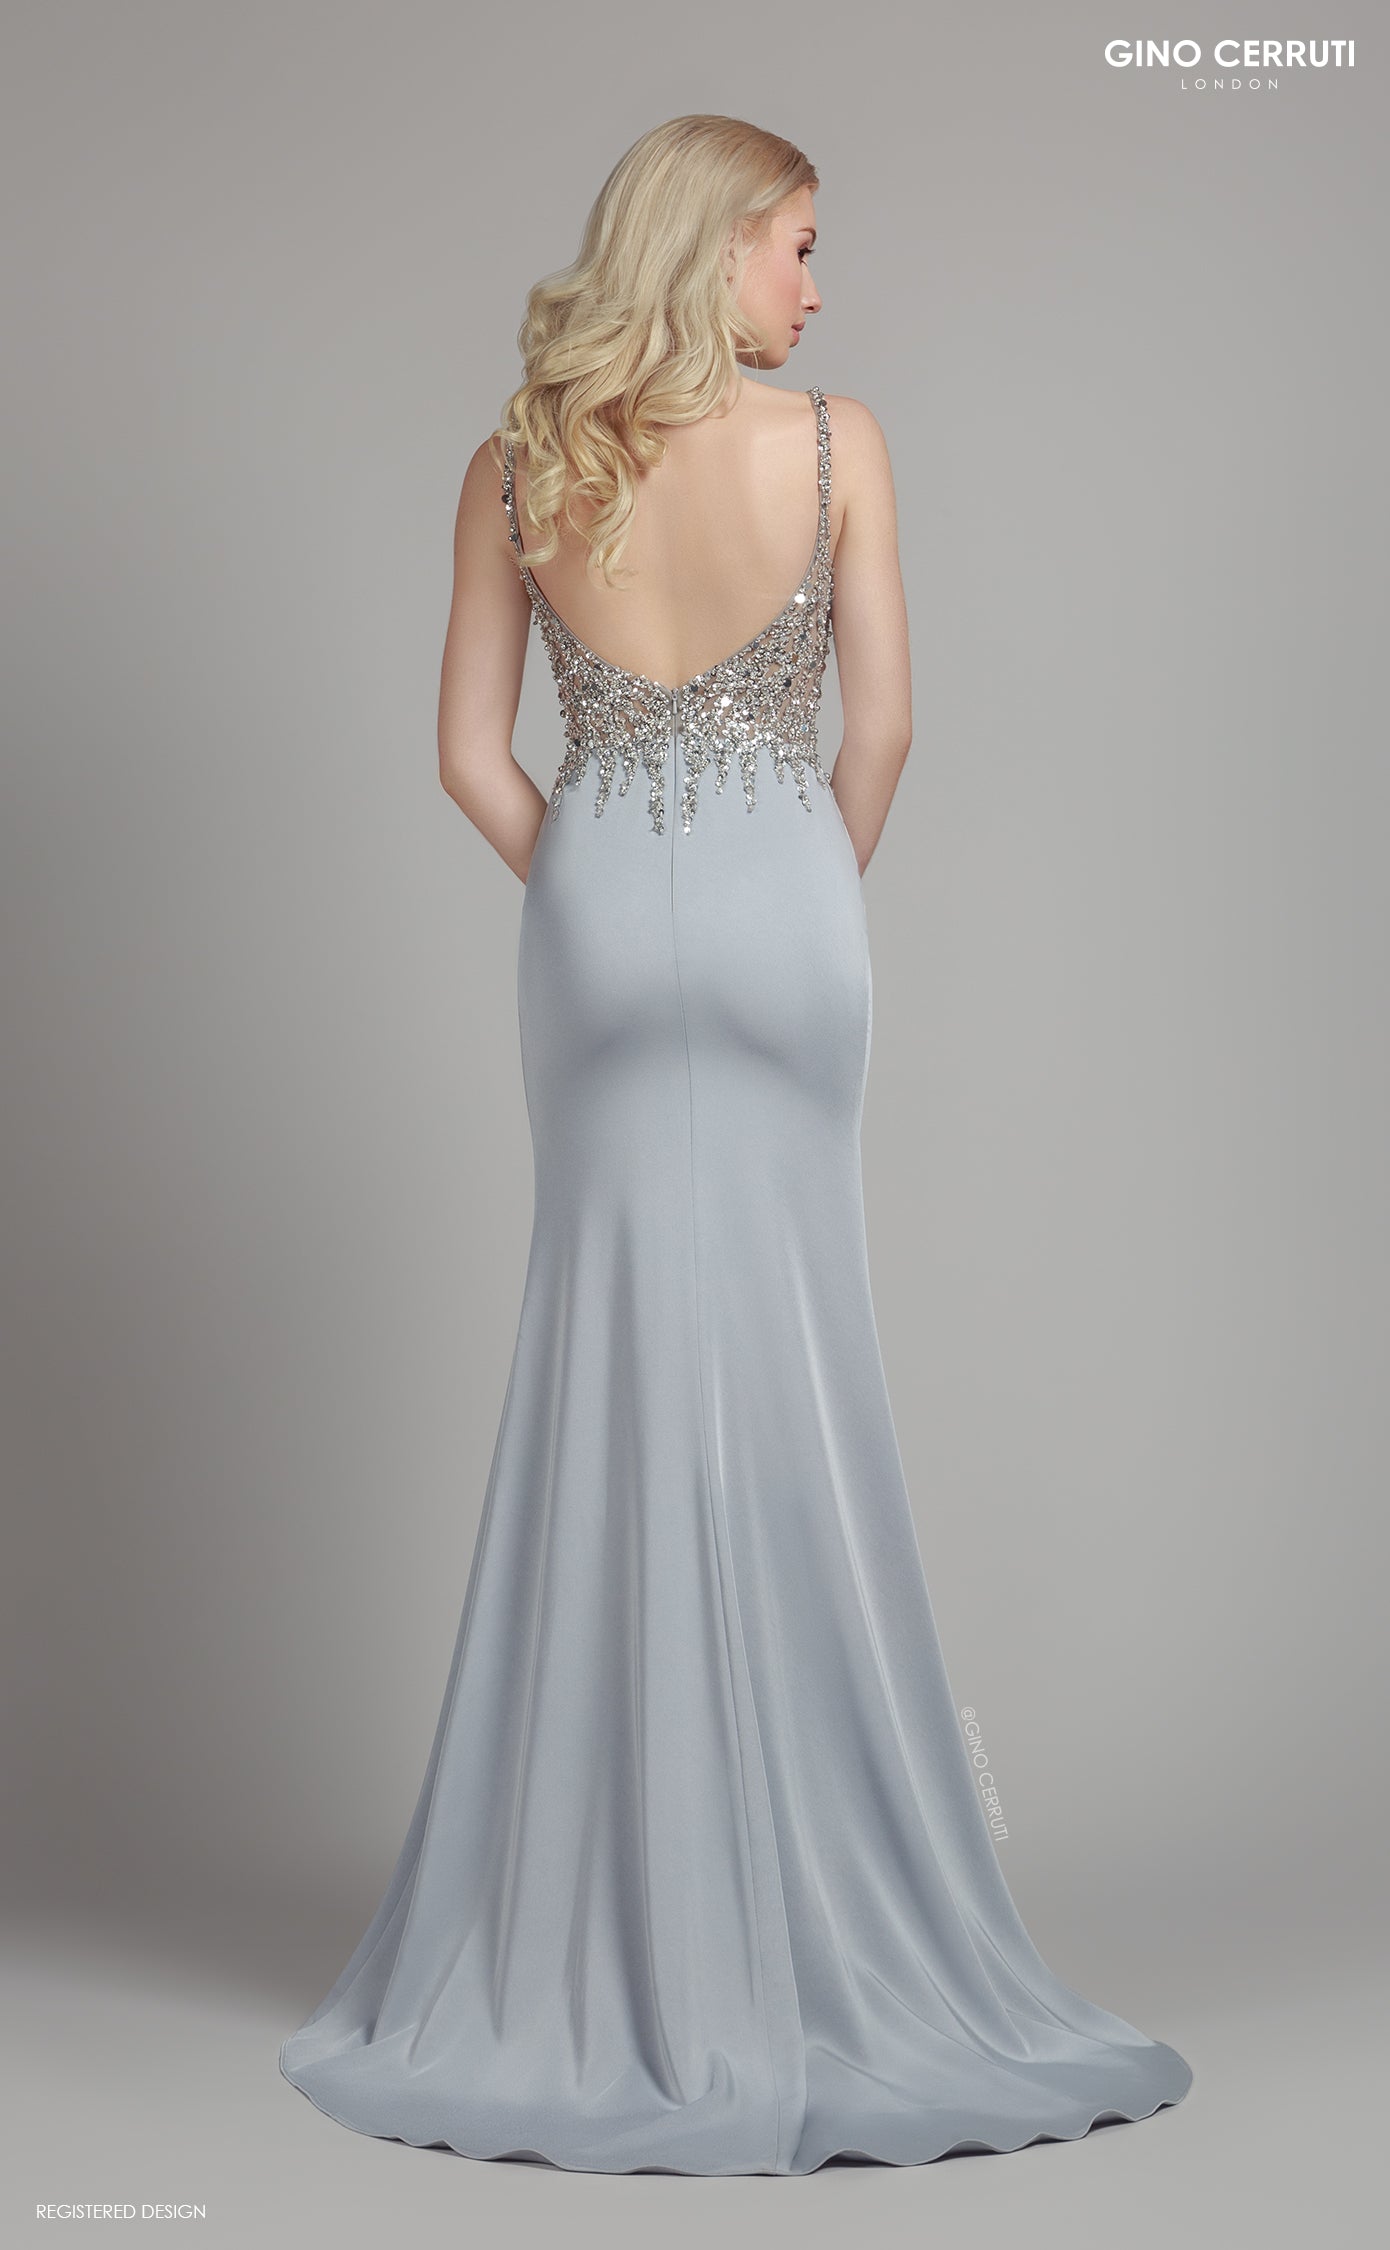 Silver embellished silky prom dress